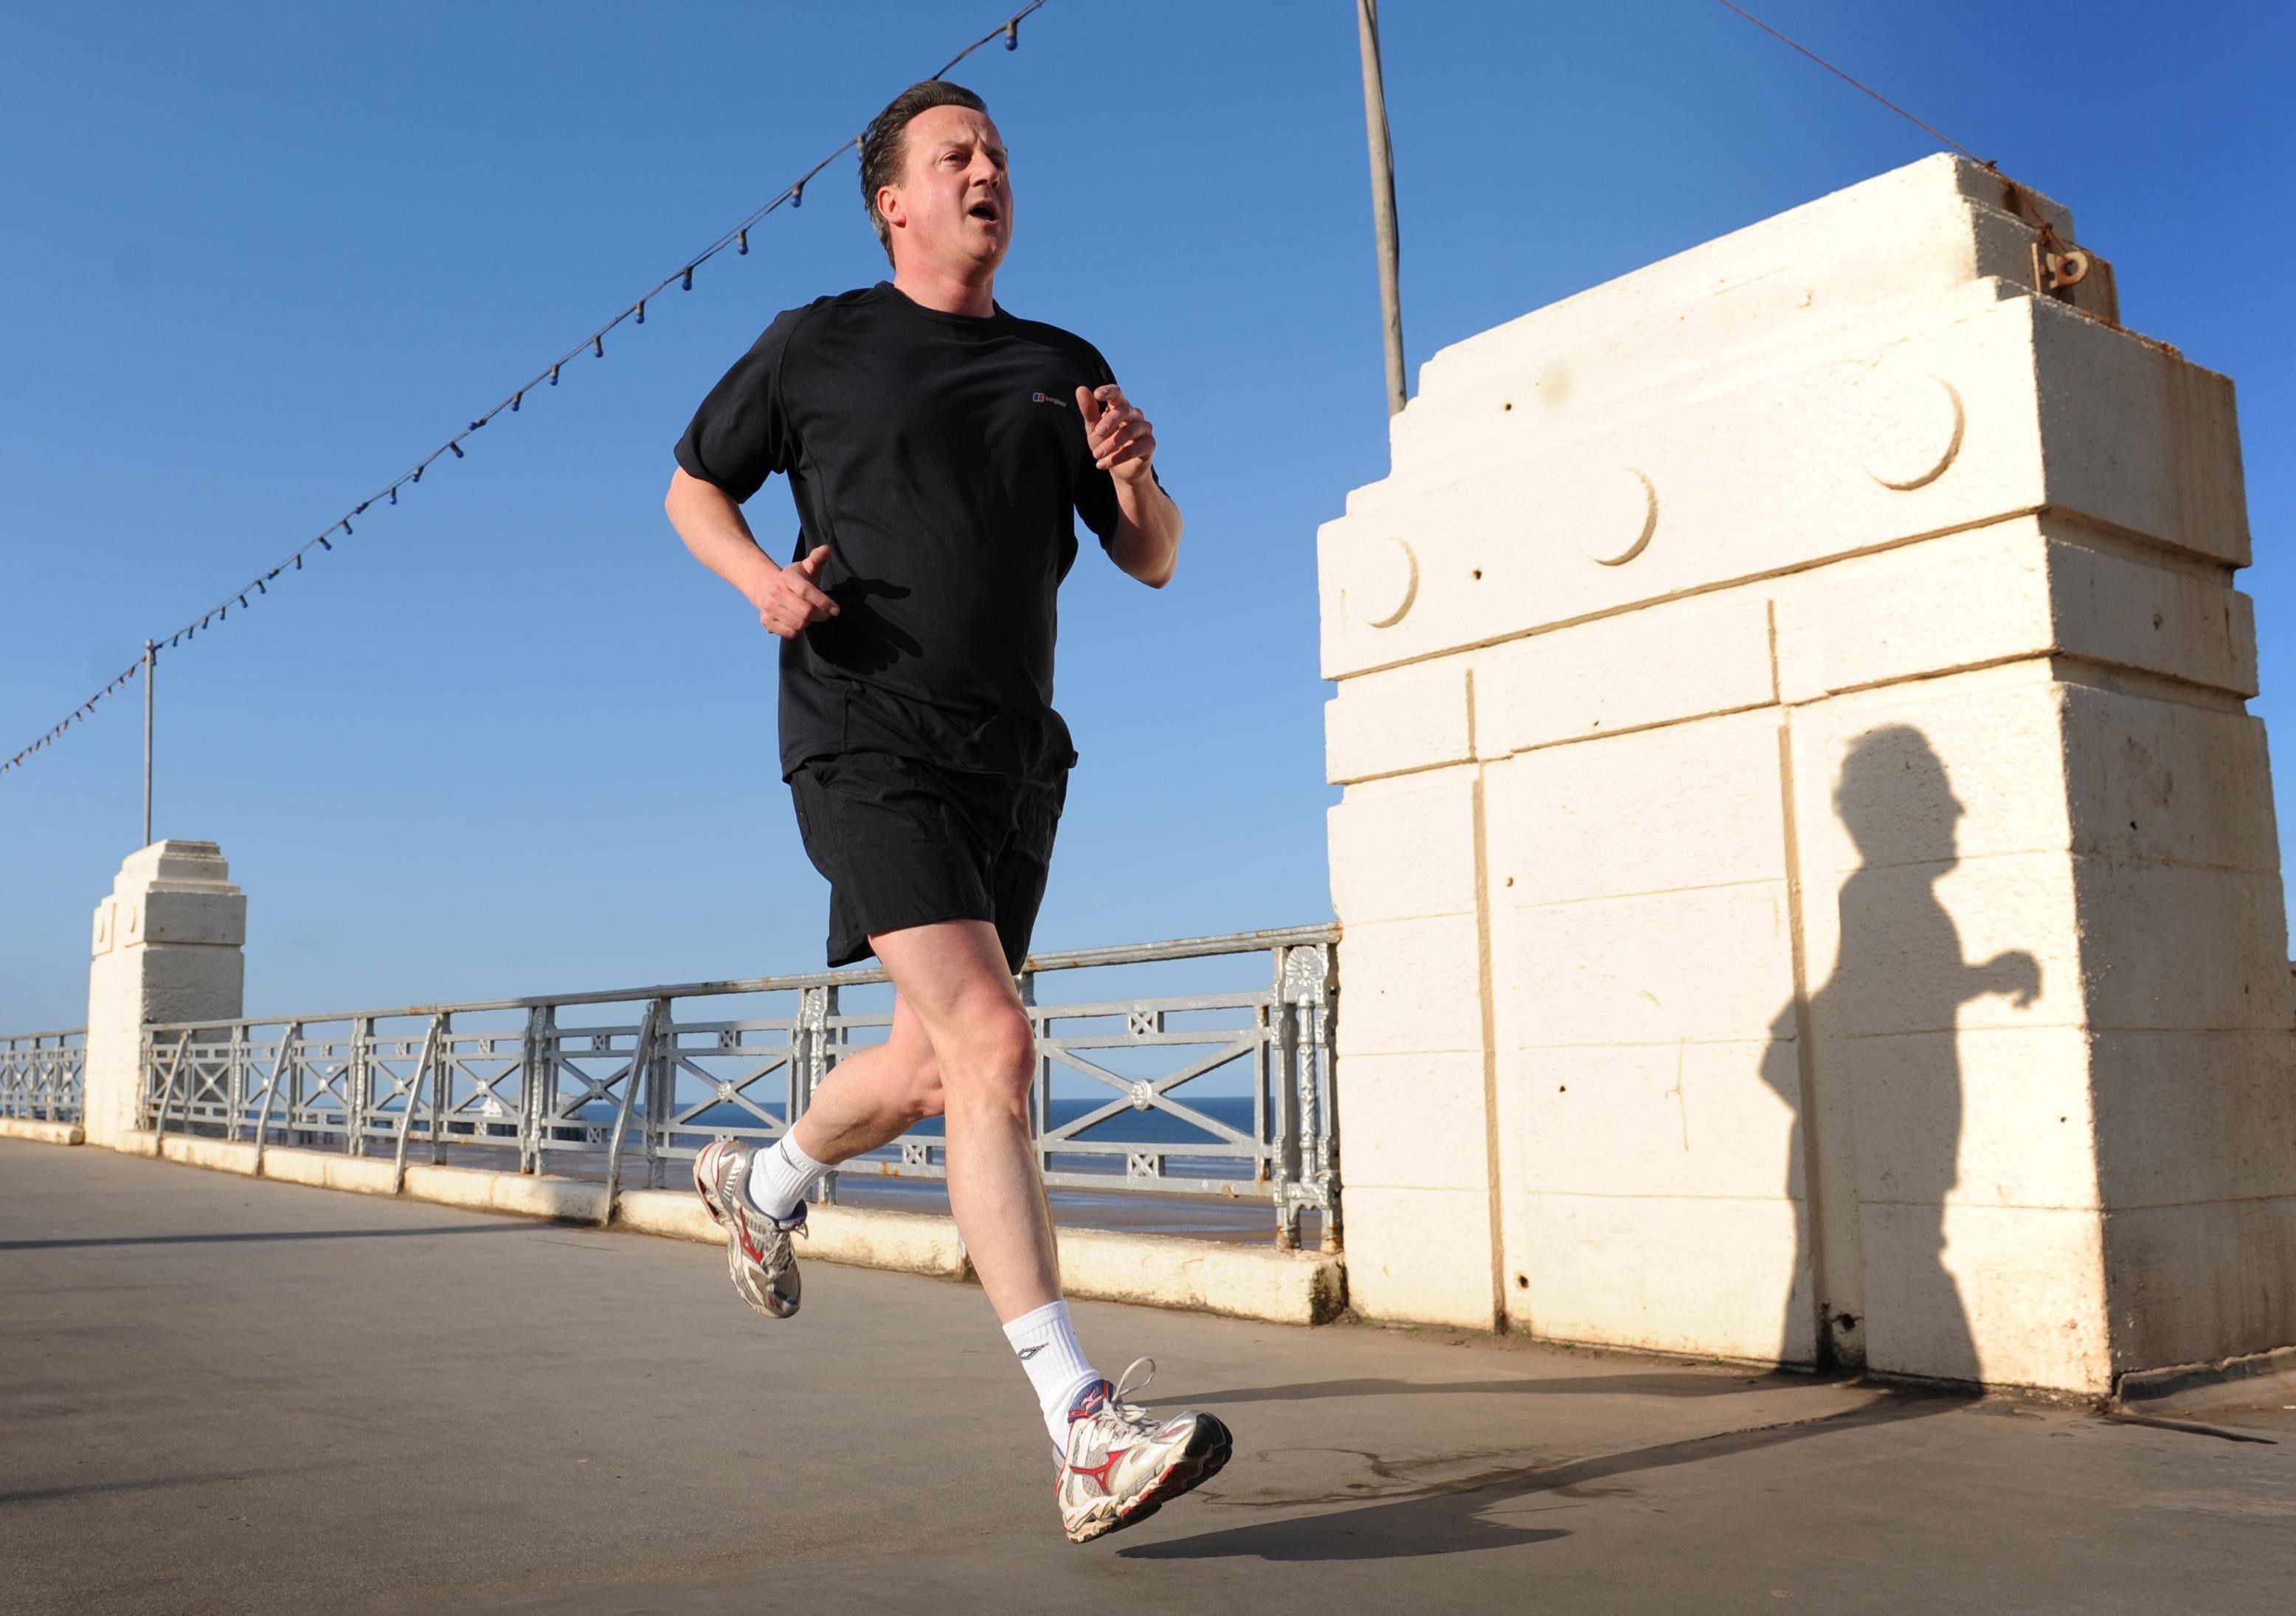 BLACKPOOL, UNITED KINGDOM - MAY 3:  Conservative Party leader David Cameron runs along the seafront in Blackpool on May 3, 2010 in North West England. The General Election, to be held on May 6, 2010 is set to be one of the most closely fought political contests in recent times with all main party leaders embarking on a four week campaign to win the votes of the United Kingdom. (Photo by Stefan Rousseau - WPA Pool / Getty Images) *** Local Caption *** David Cameron